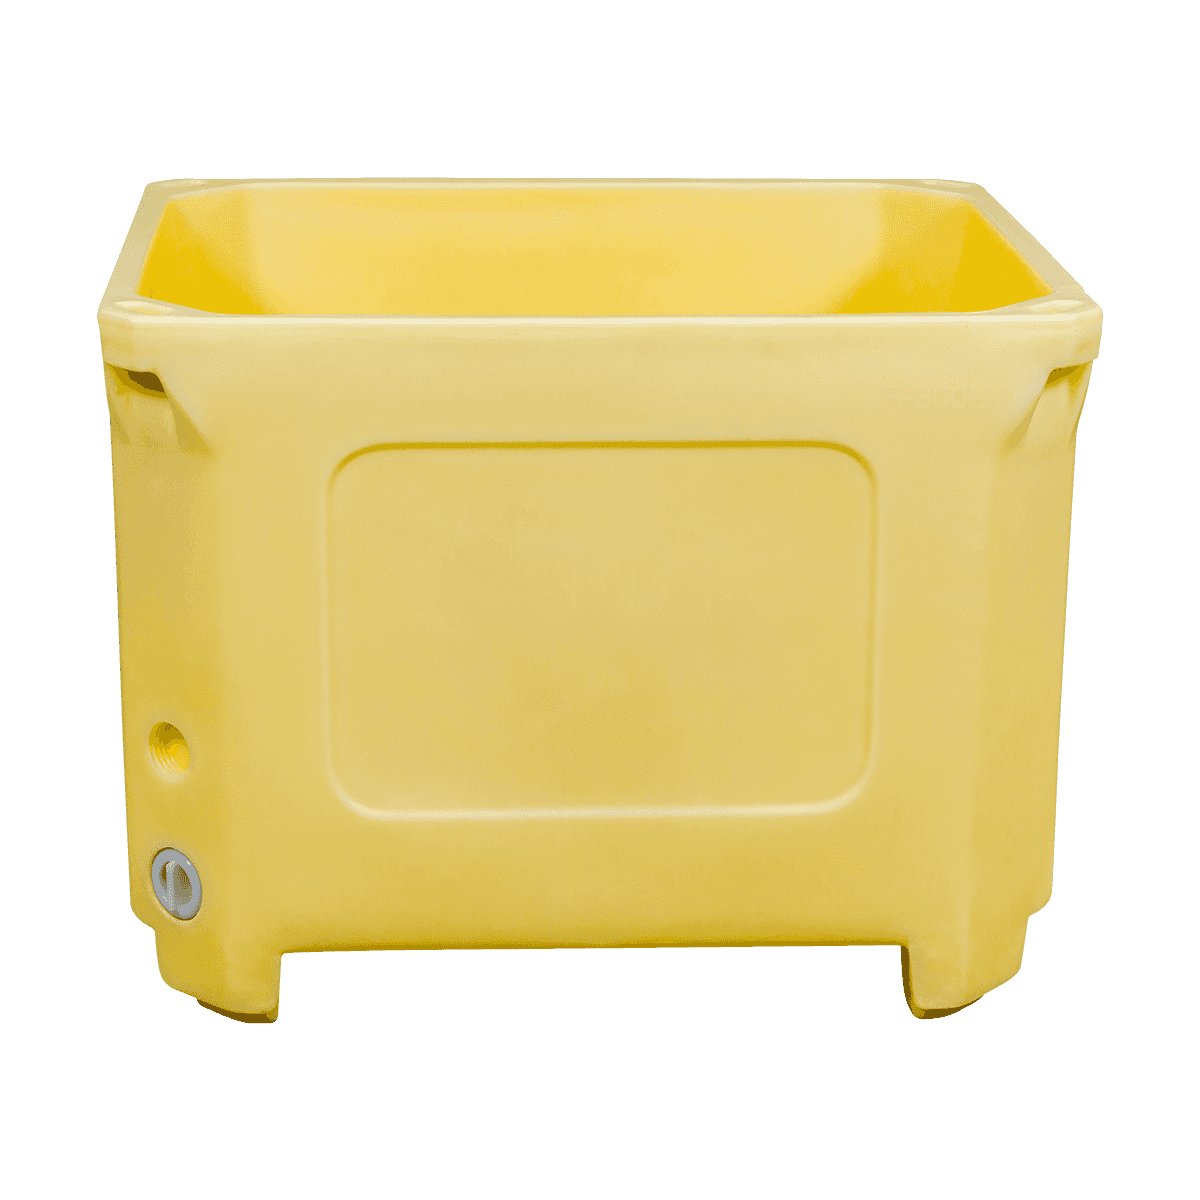 F-300L Insulated Seafood Industrial Use Plastic Containers